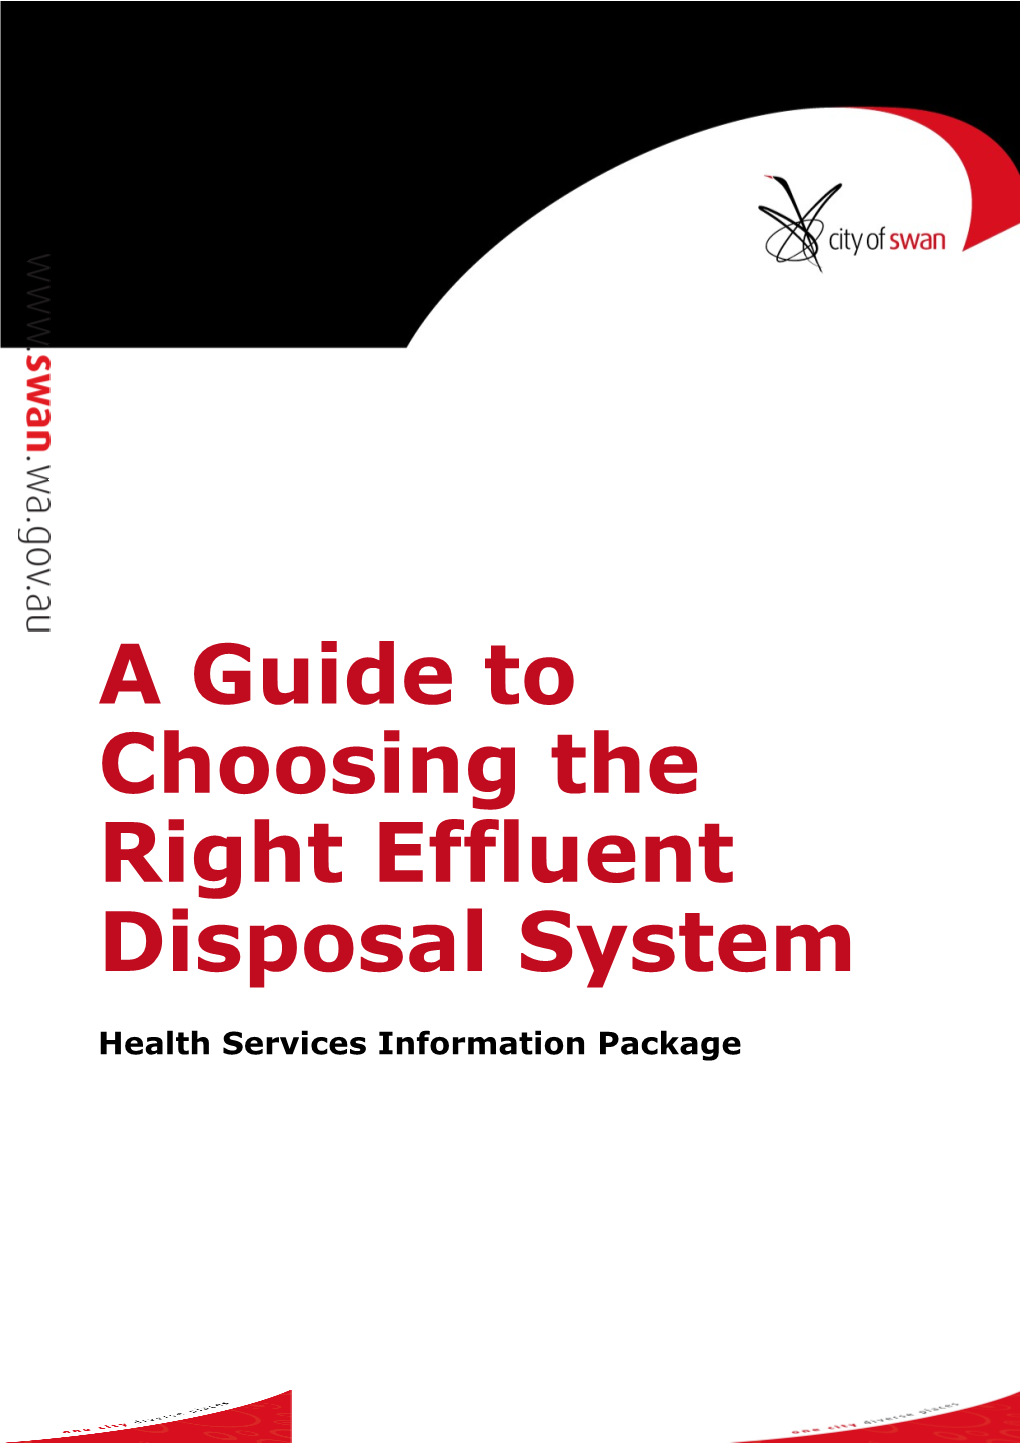 A Guide to Choosing the Righteffluent Disposalsystem